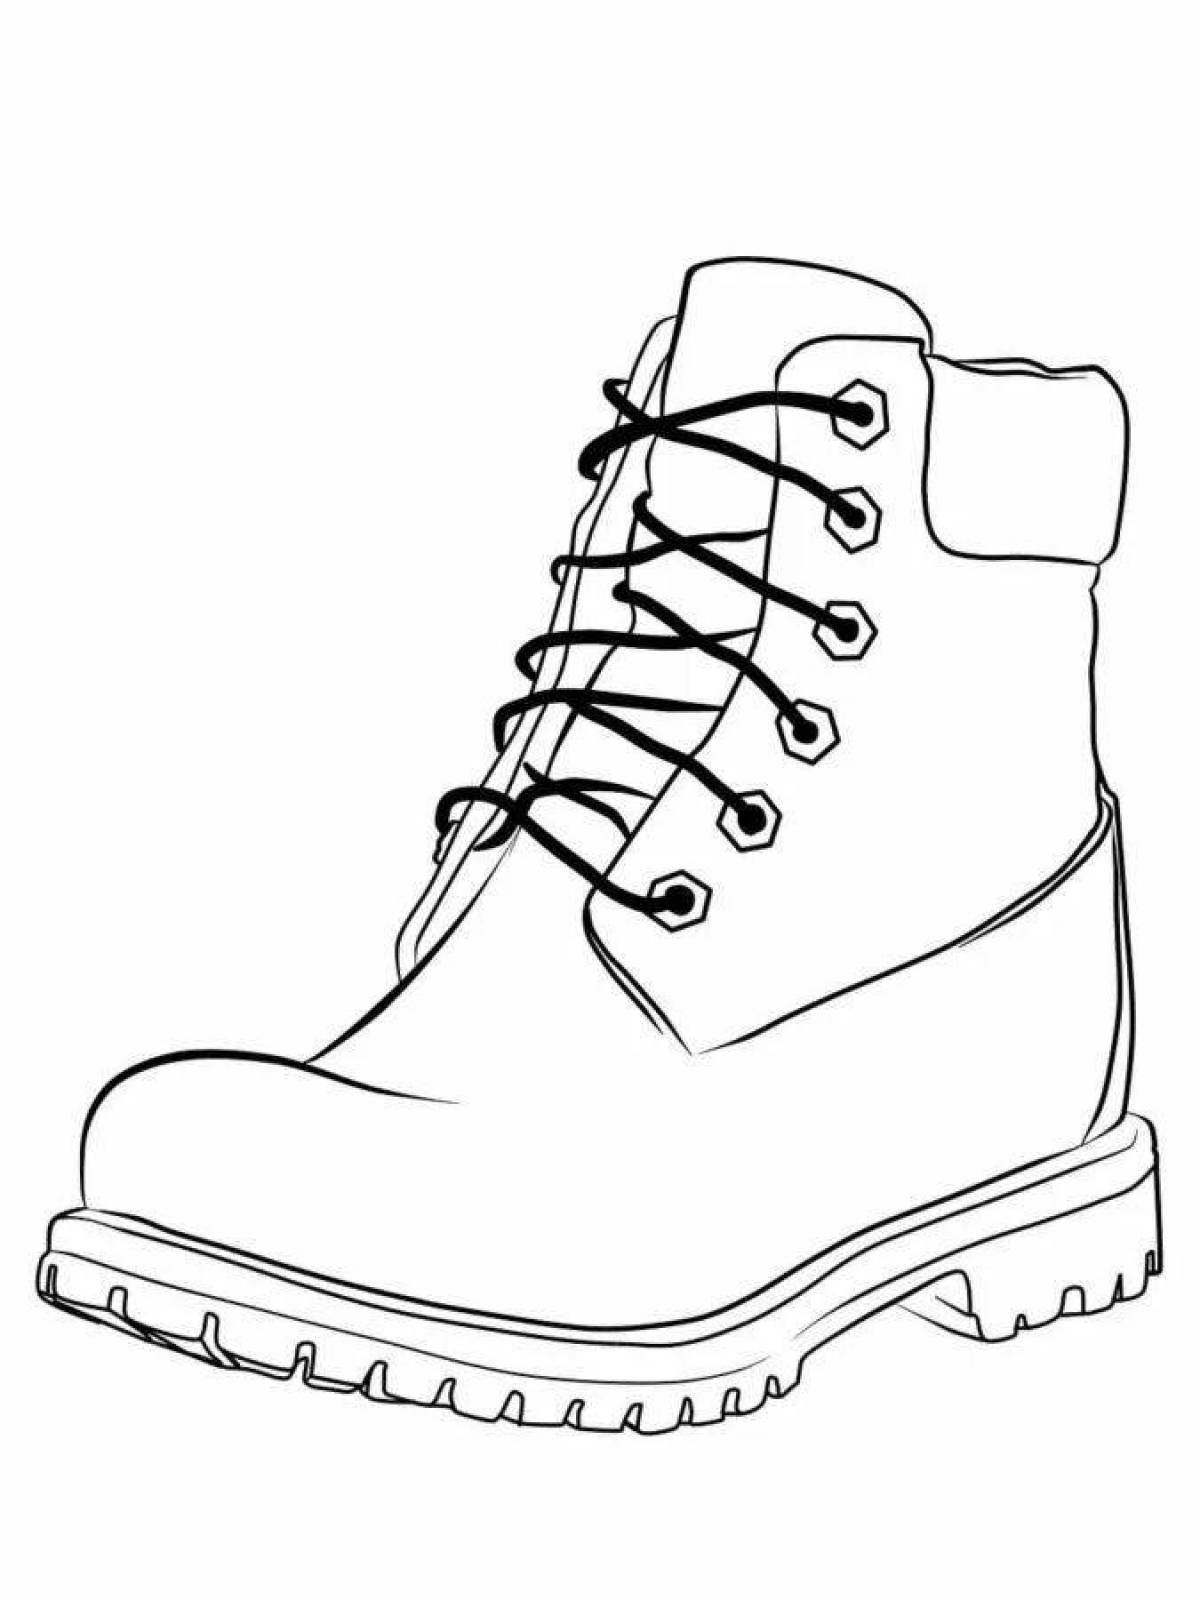 Coloring page adorable winter shoes